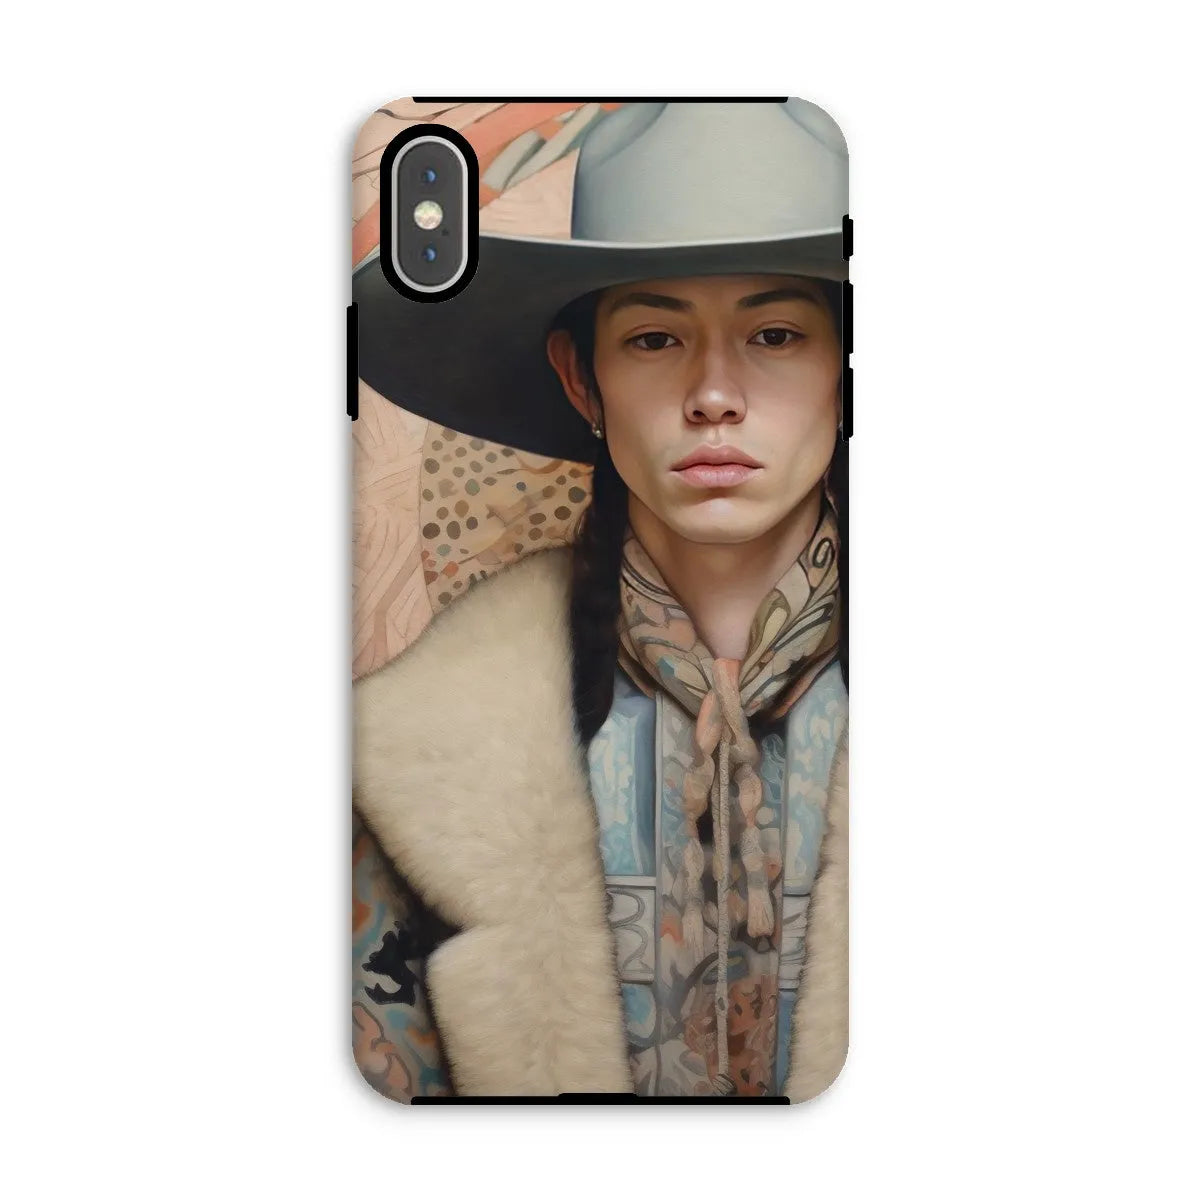 Jacy The Gay Cowboy - Dandy Gay Aesthetic Art Phone Case - Iphone Xs Max / Matte - Mobile Phone Cases - Aesthetic Art